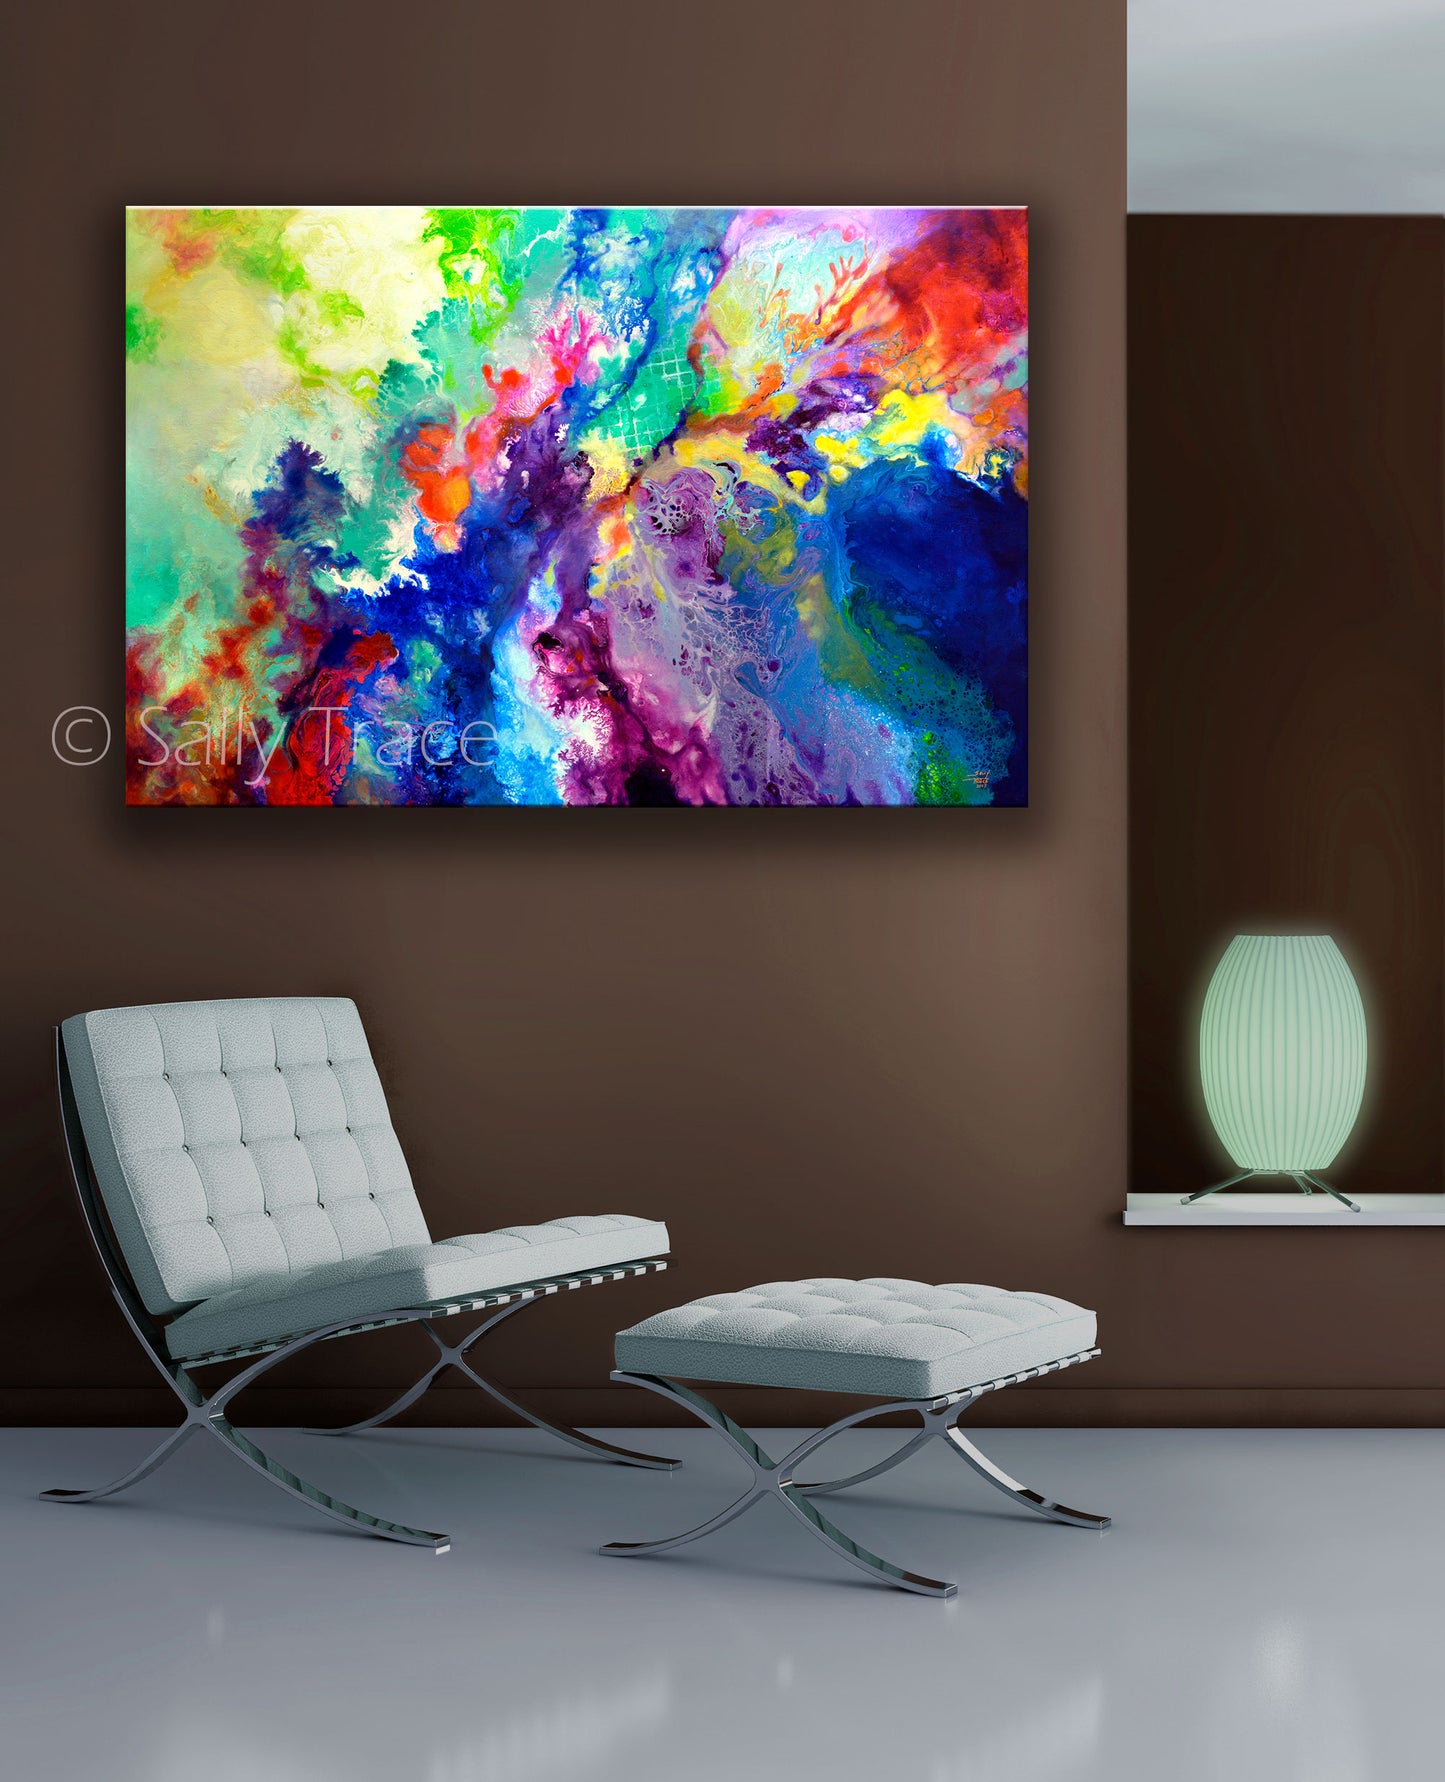 Fluid abstract paiting prints on canvas by Sally Trace "Touch Me Here", room view